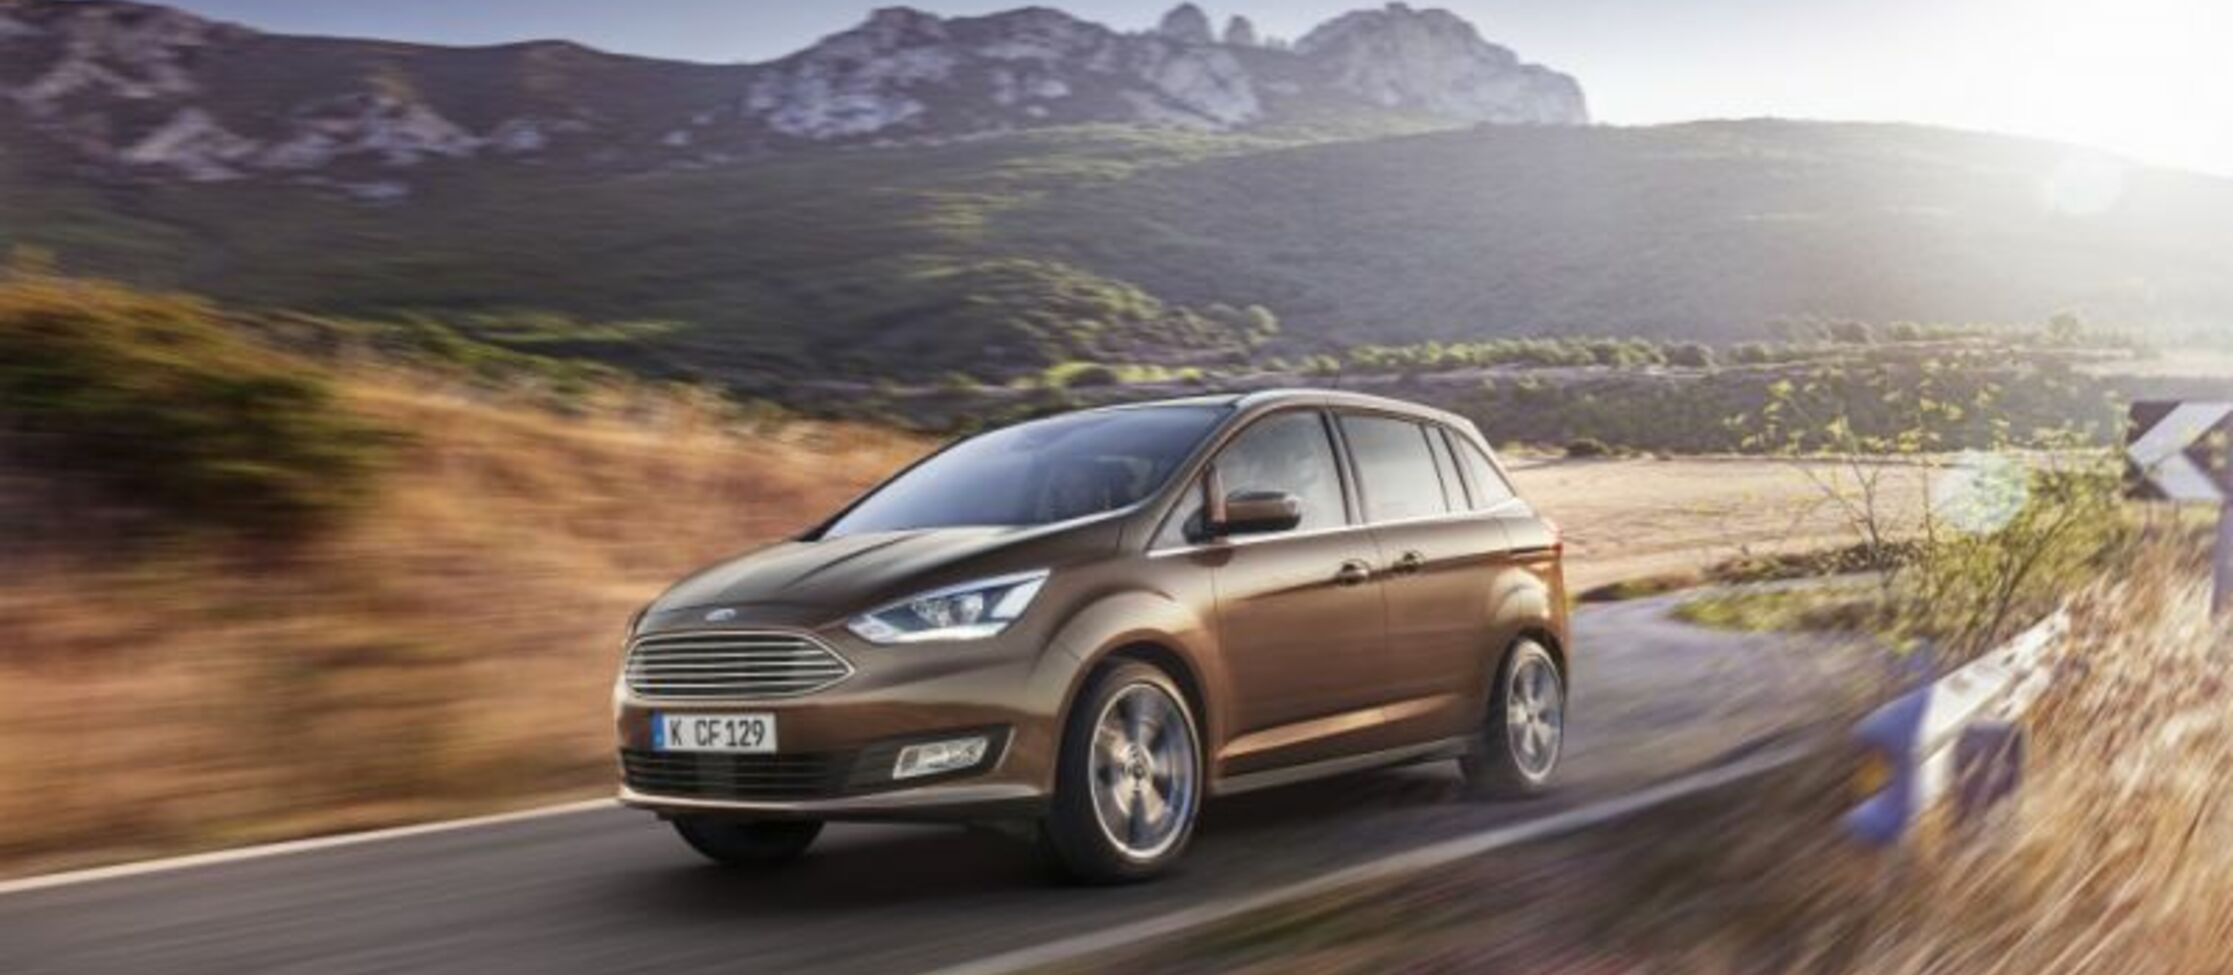 Ford Grand C-MAX (facelift 2015) 1.5 EcoBoost (182 Hp) PowerShift S&S 2015, 2016, 2017, 2018